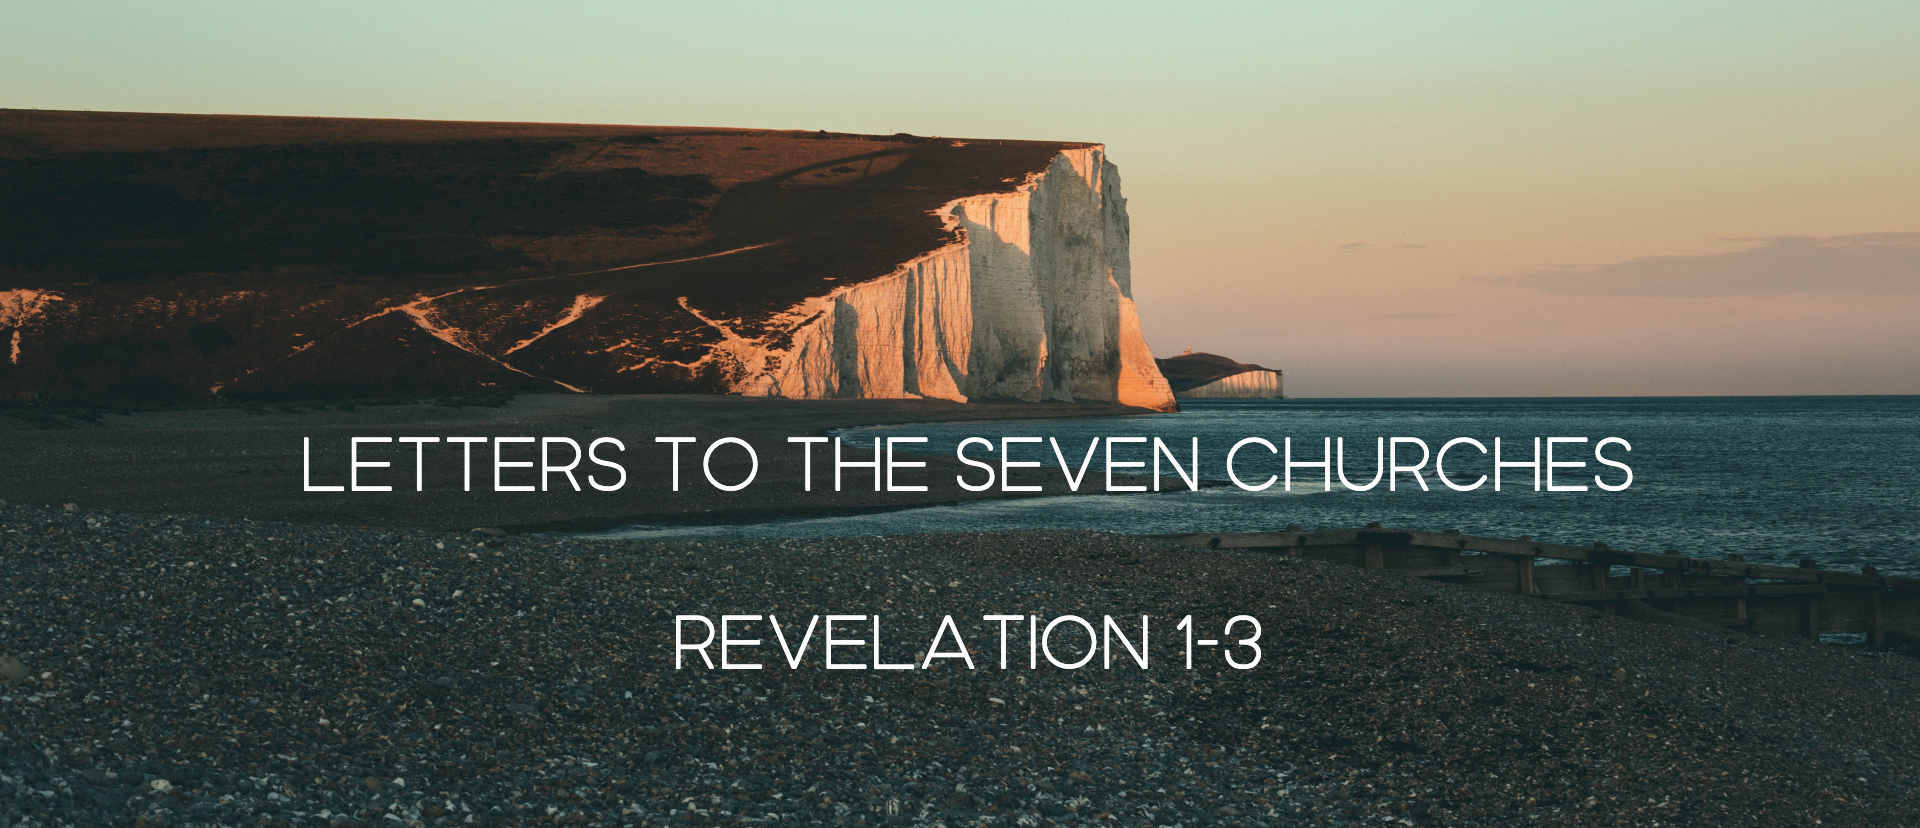 Letters to the Seven Churches  banner